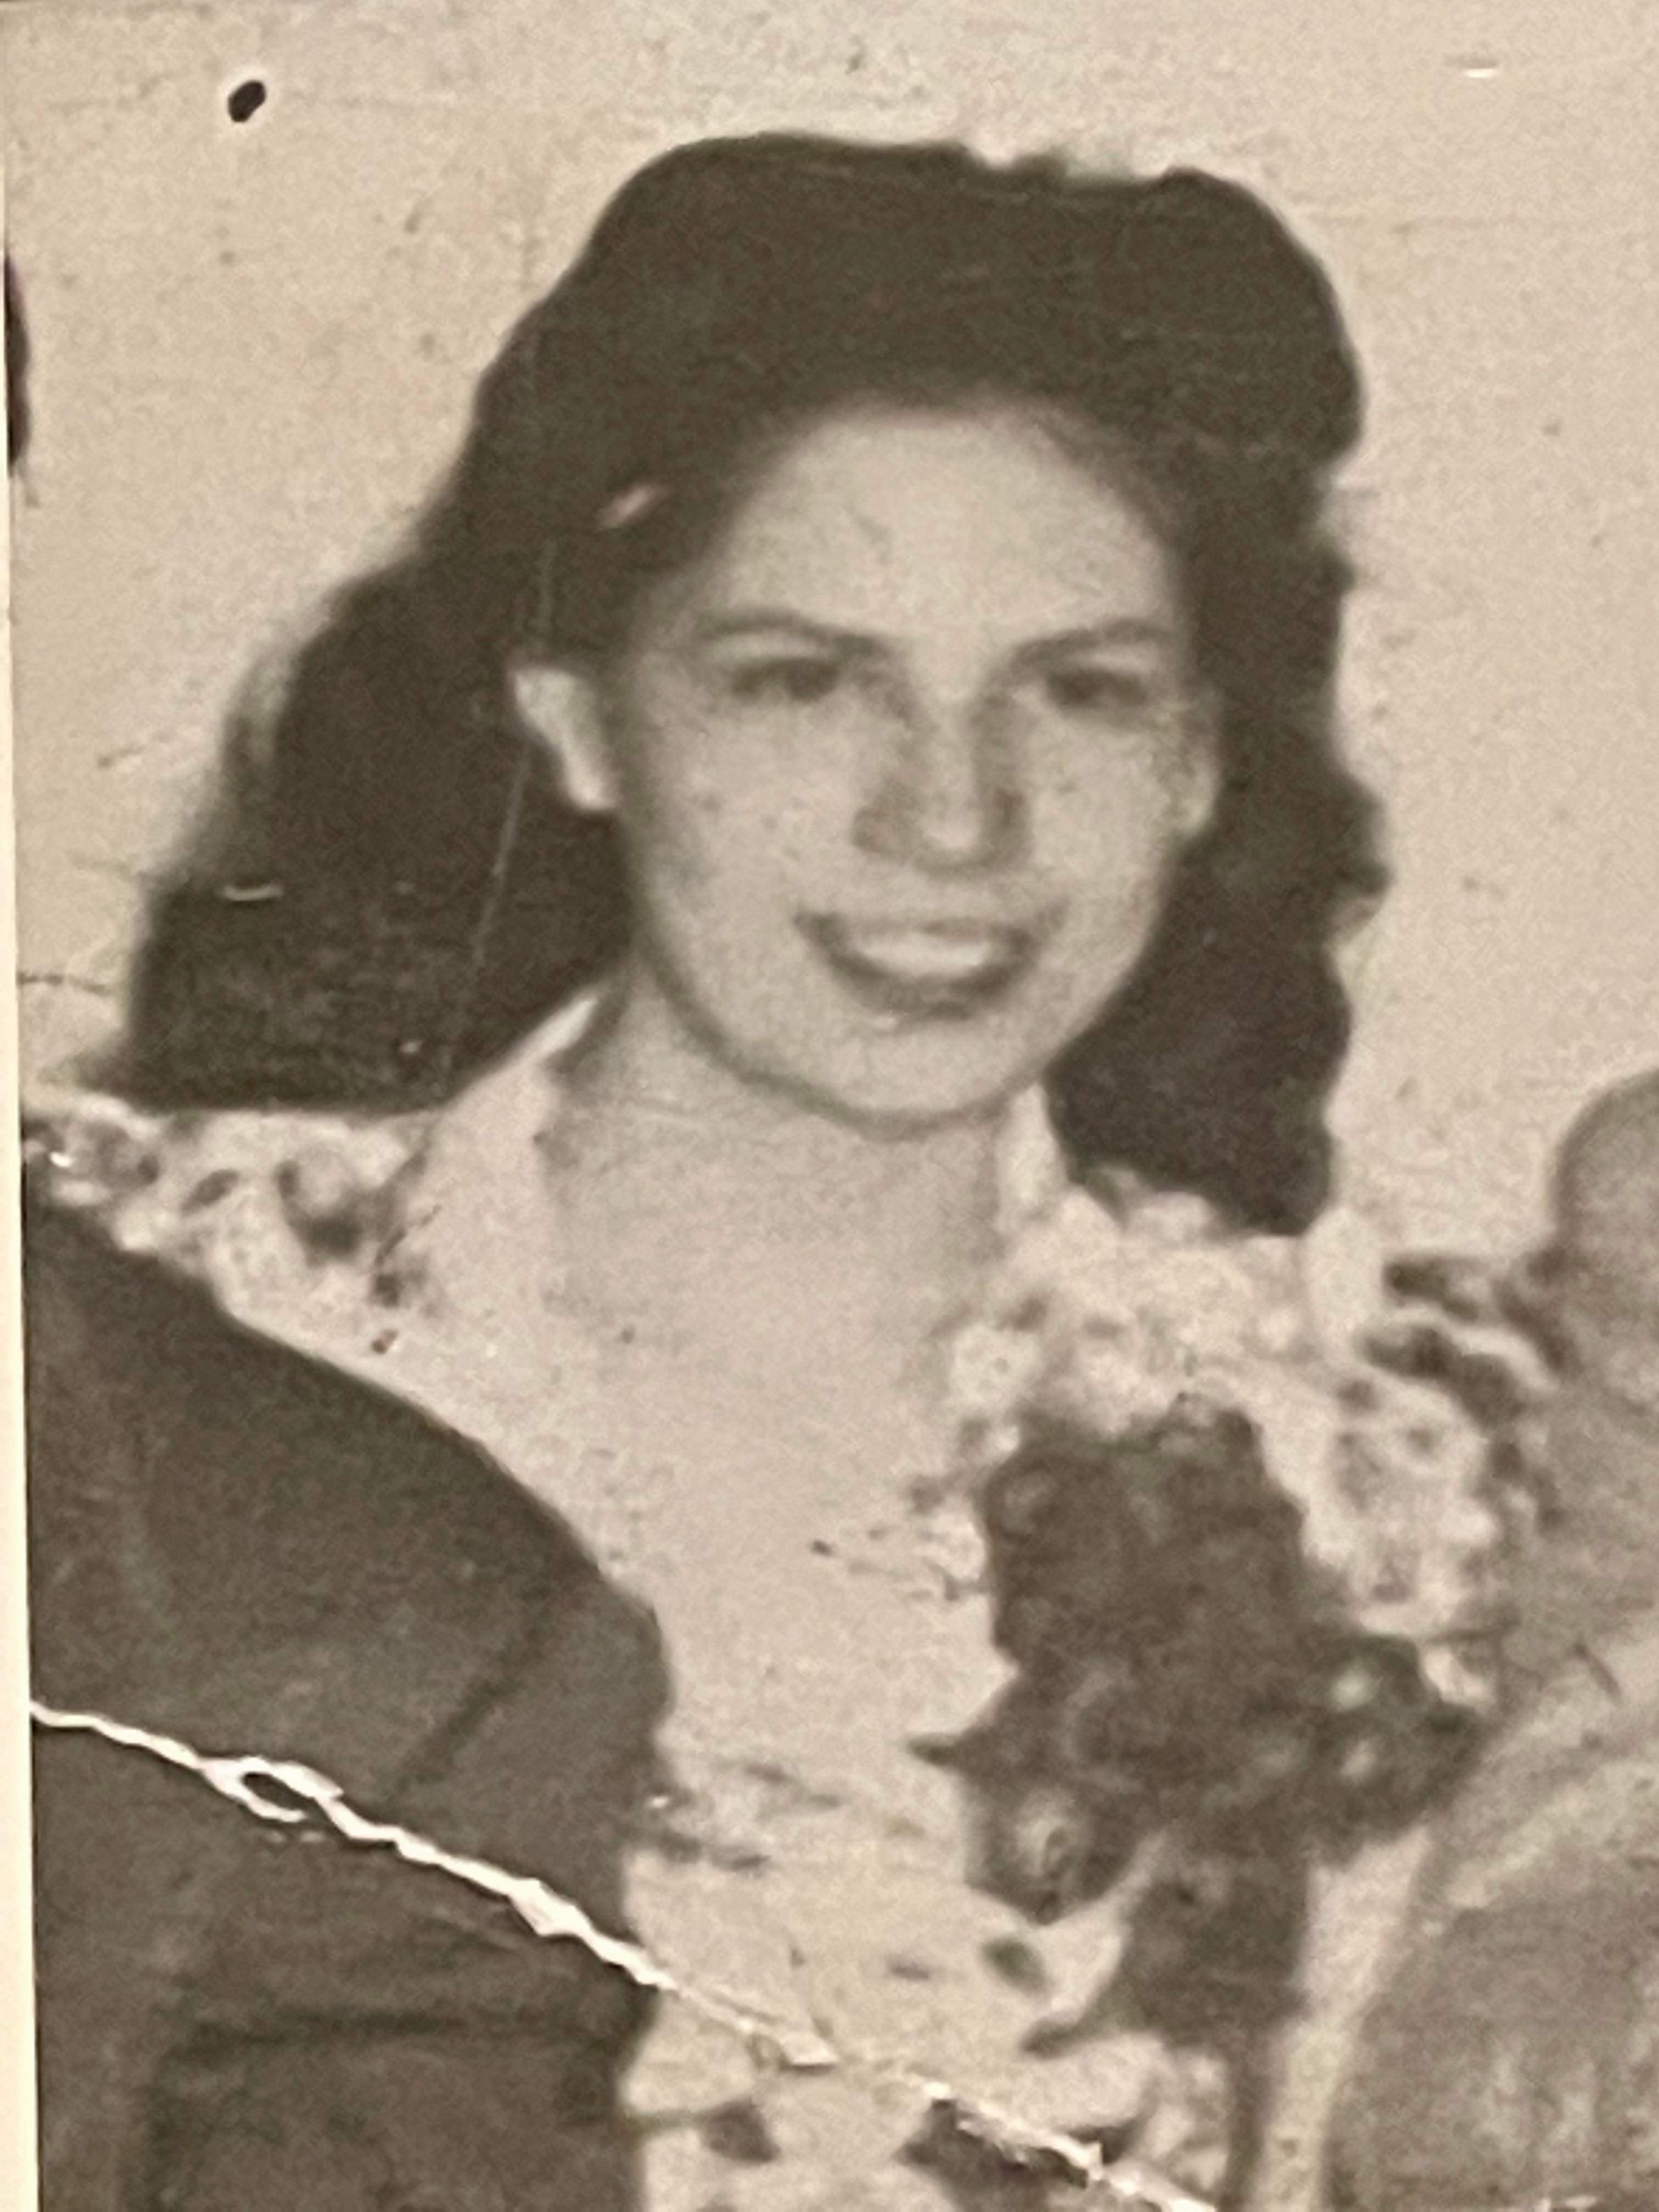 Mabel Hill sometime in the 1950s perhaps